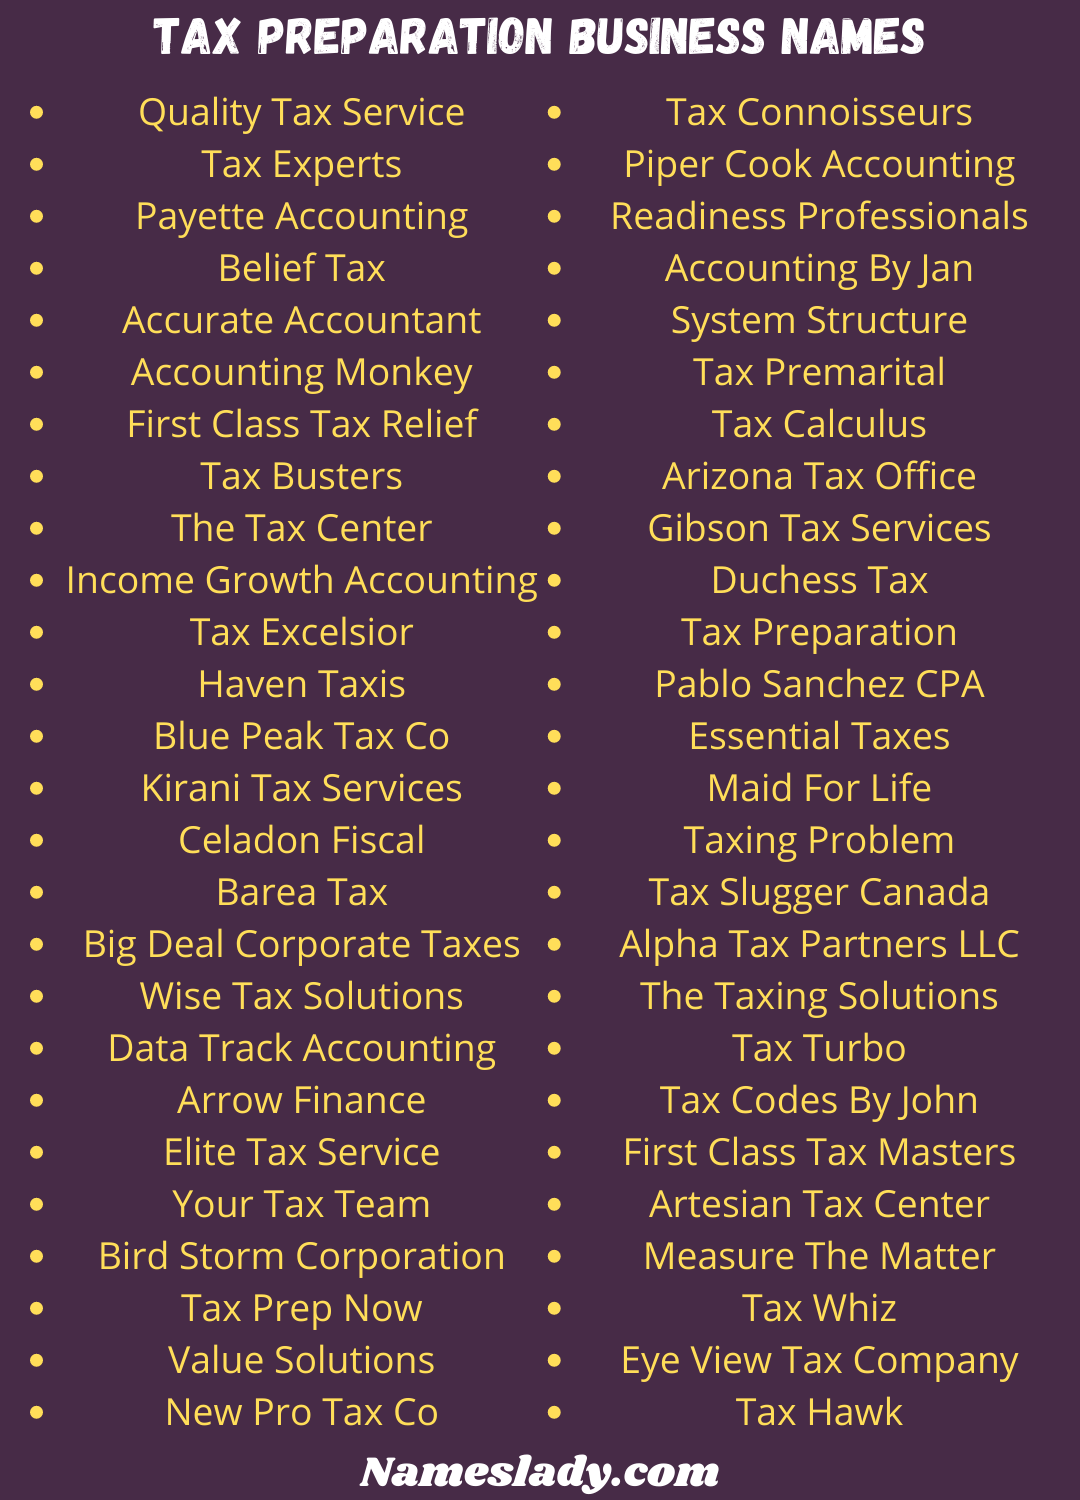 Tax Preparation Business Names